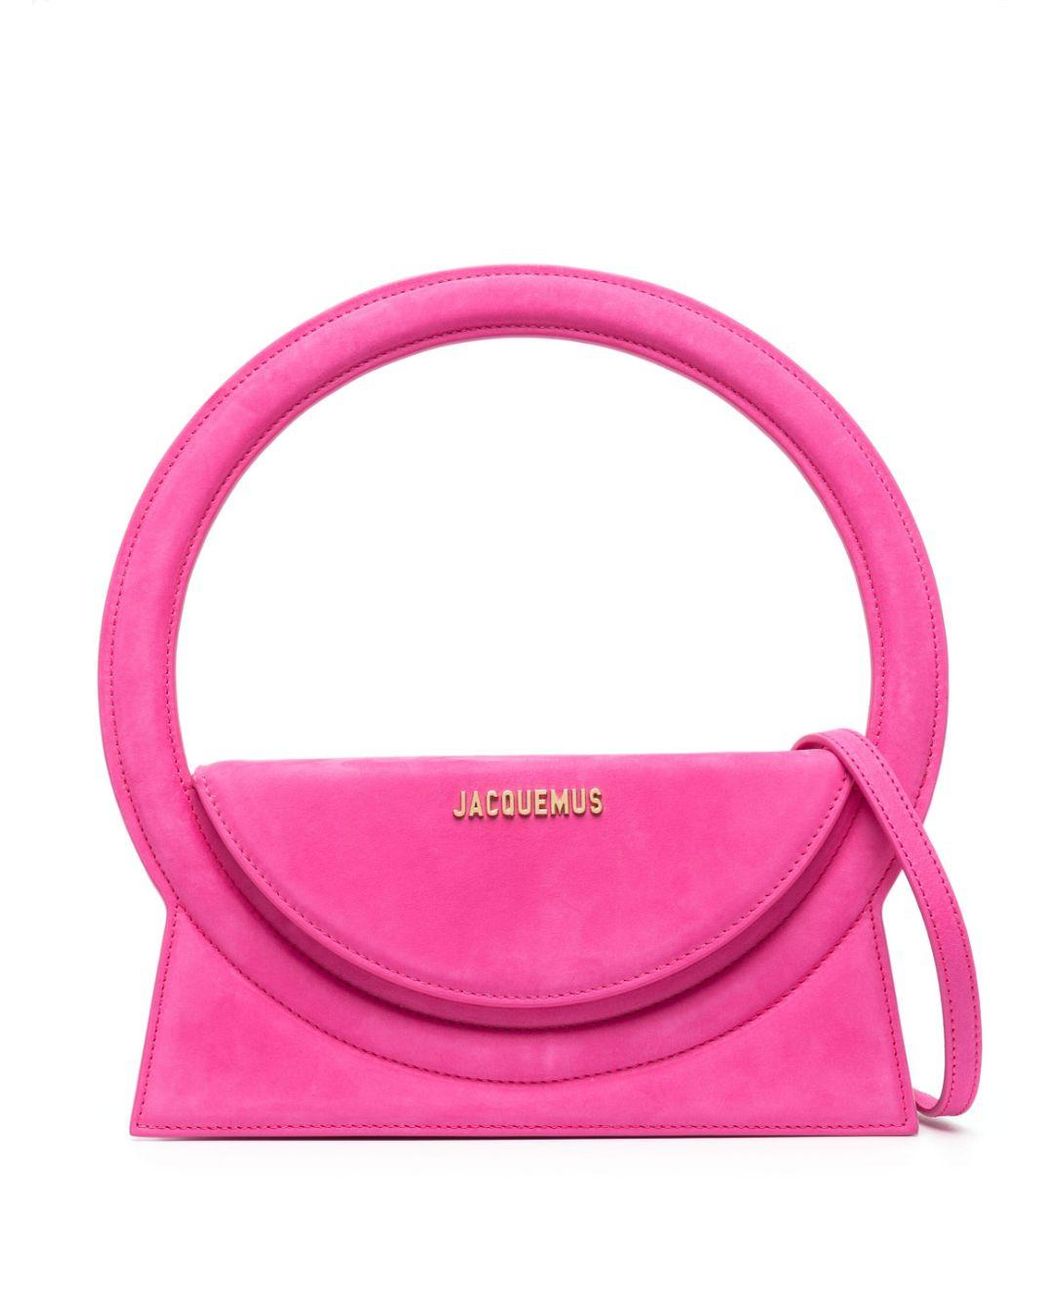 Jacquemus Le Sac Rond Shoulder Bag in Pink | Lyst